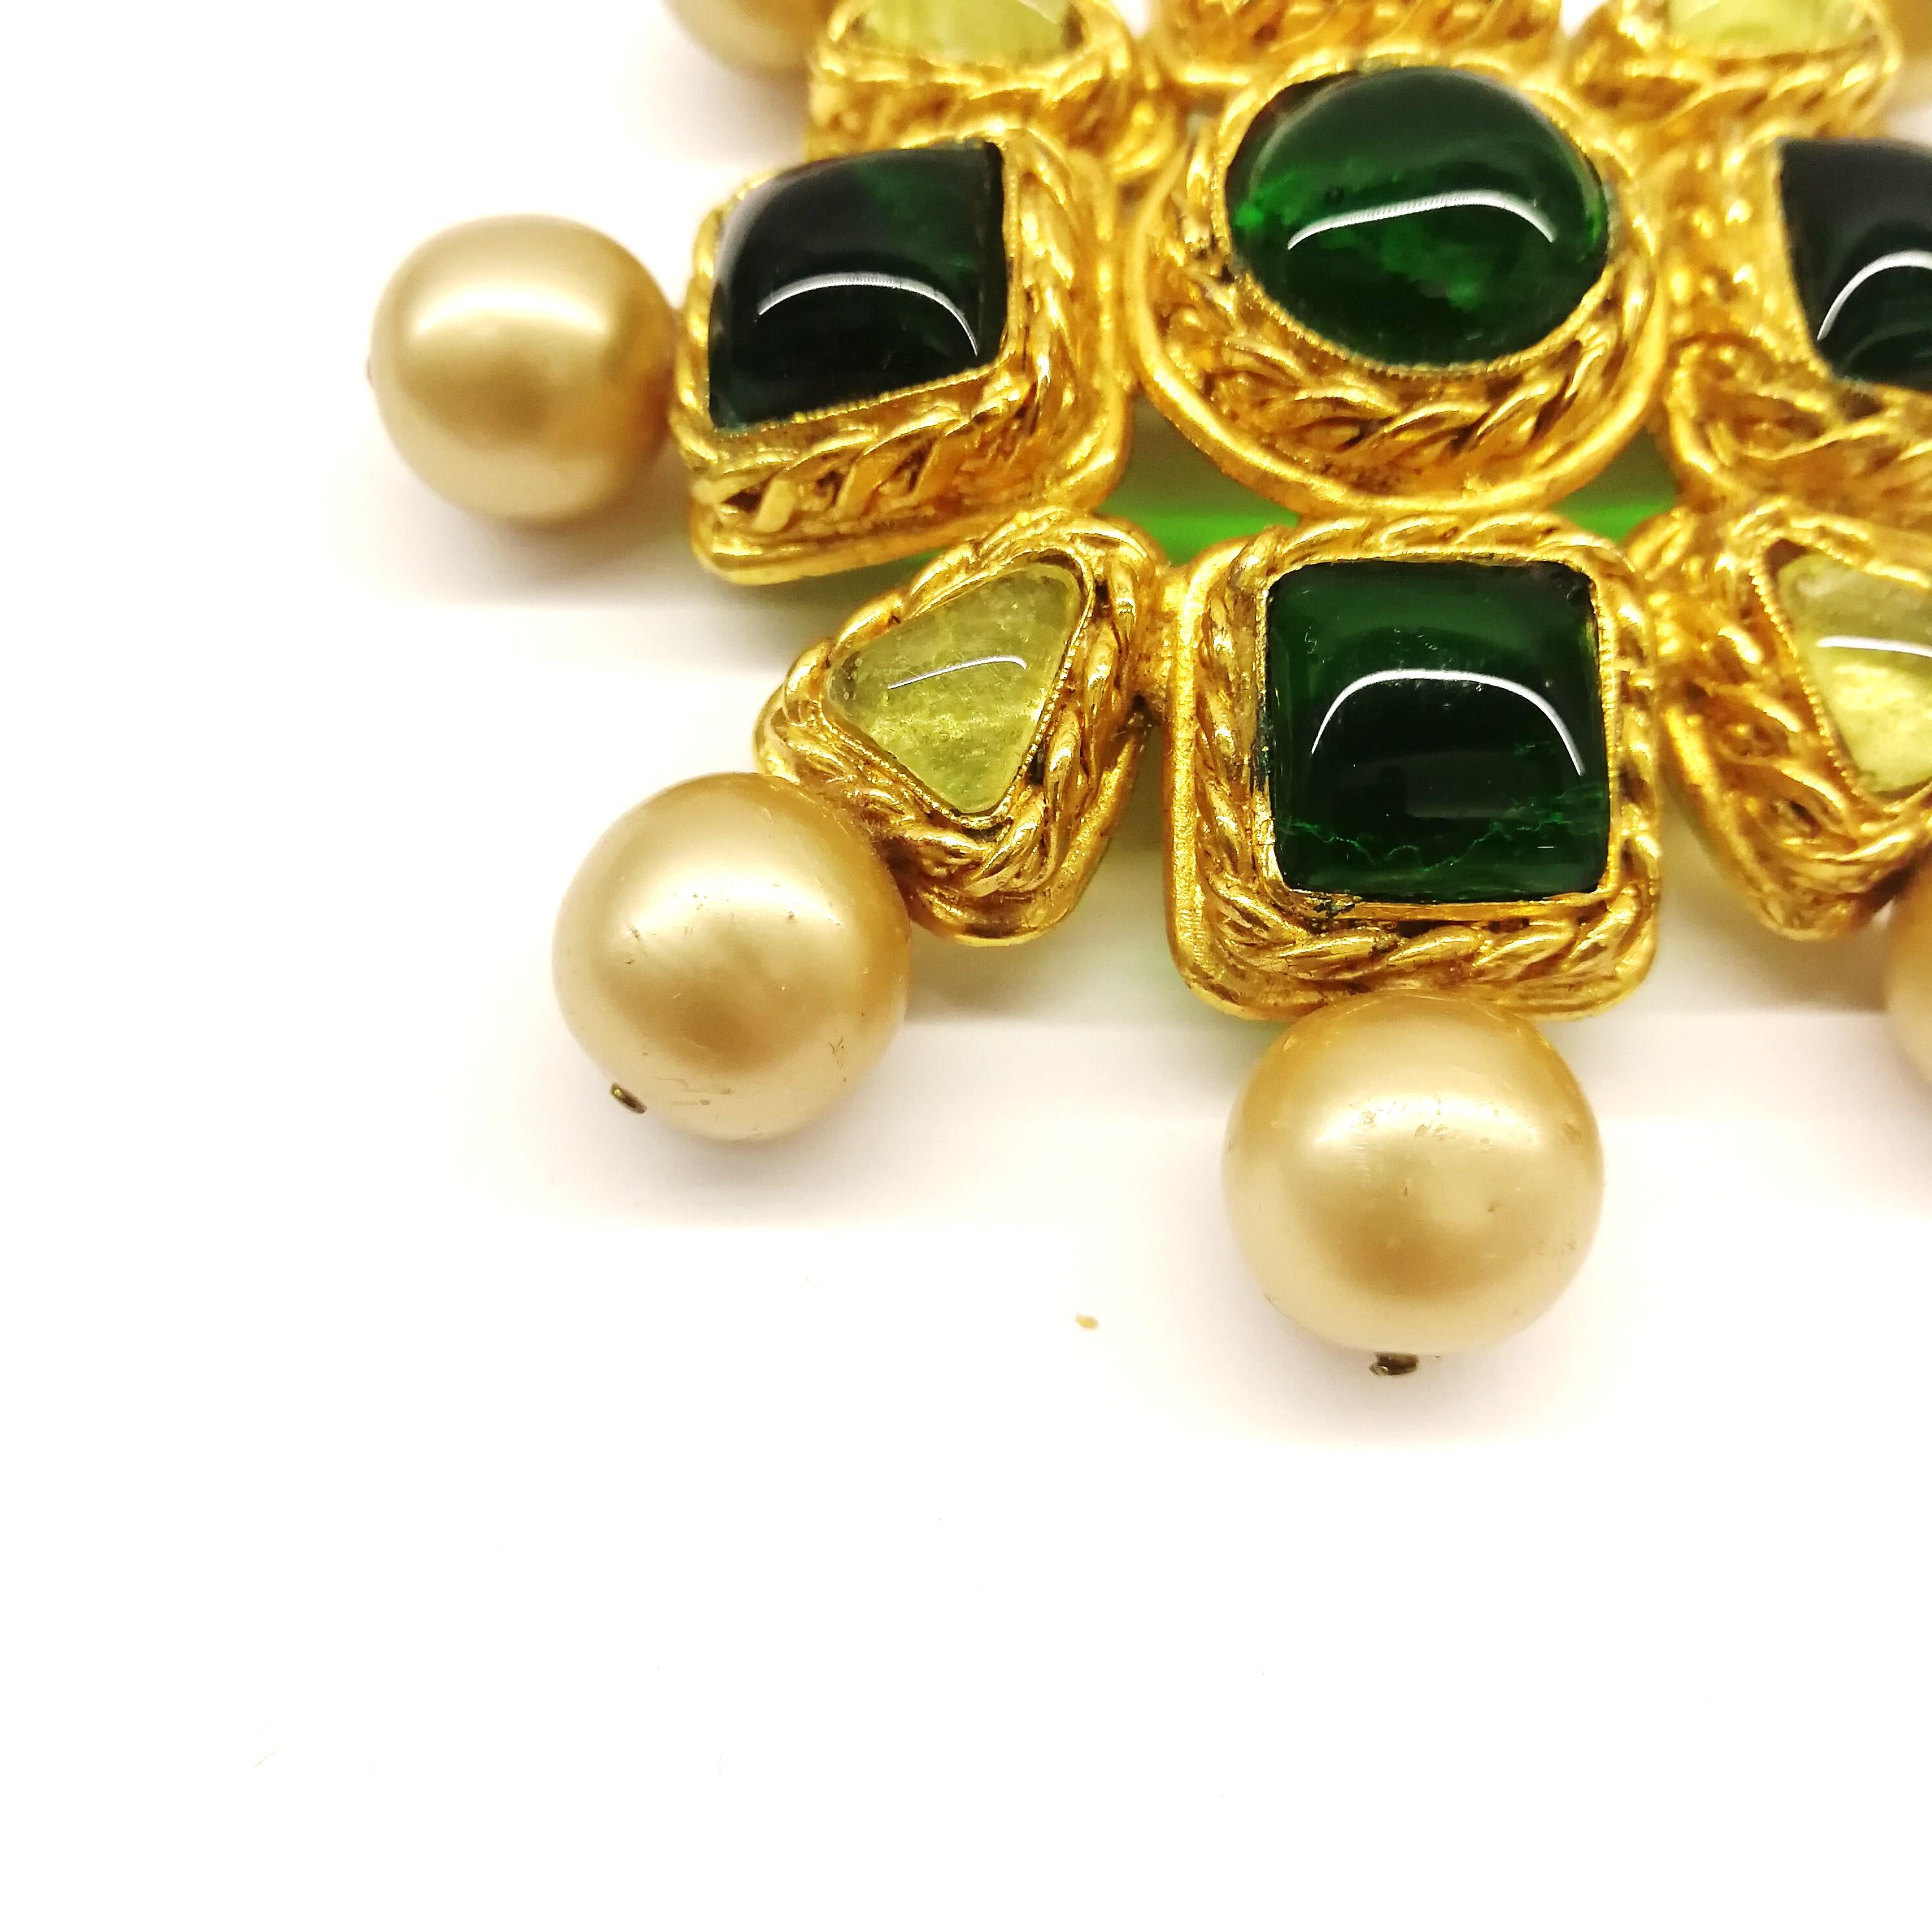 This iconic design, from  1986, was designed by Victoire de Castellane for Chanel, a period during which she designed most of the Chanel jewels that are so collectable and inspire today. Made of gilt metal, with peridot and emerald poured glass, and